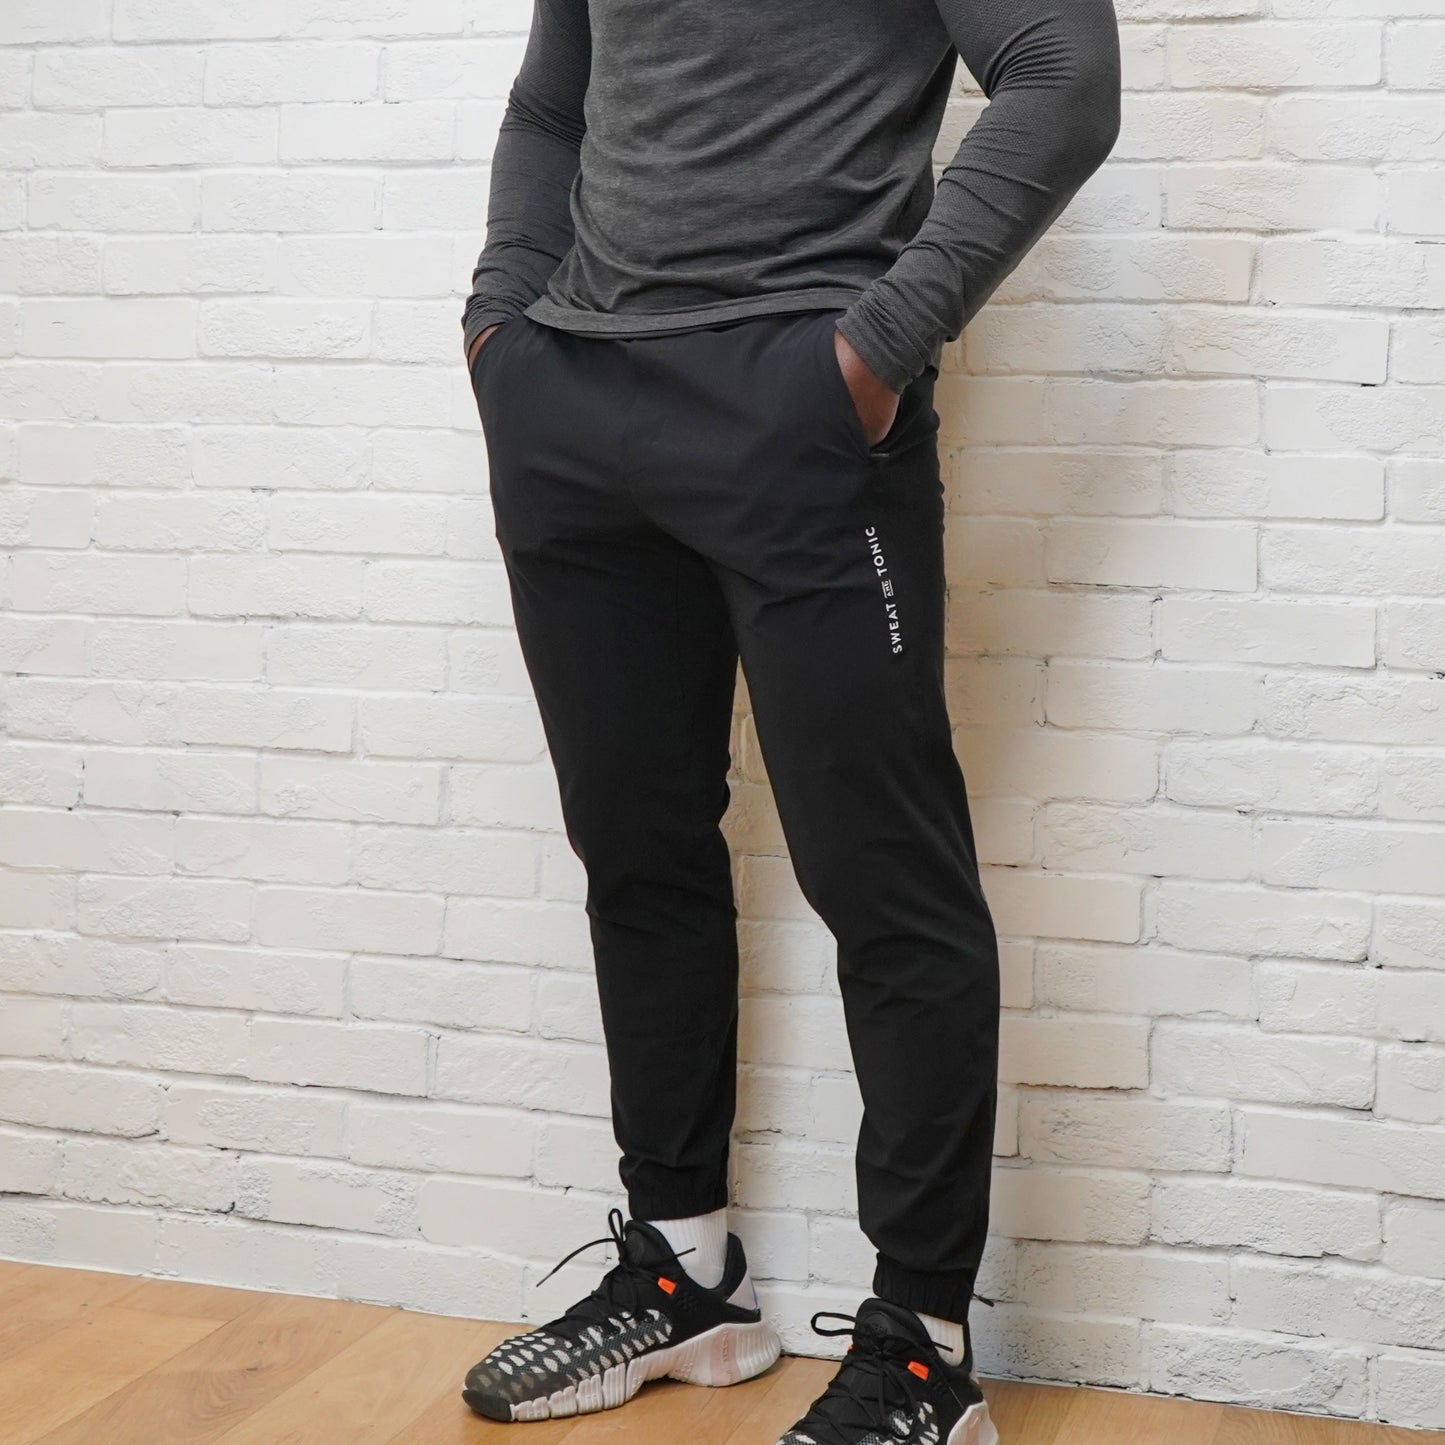 Gym-To-Street Surge Joggers